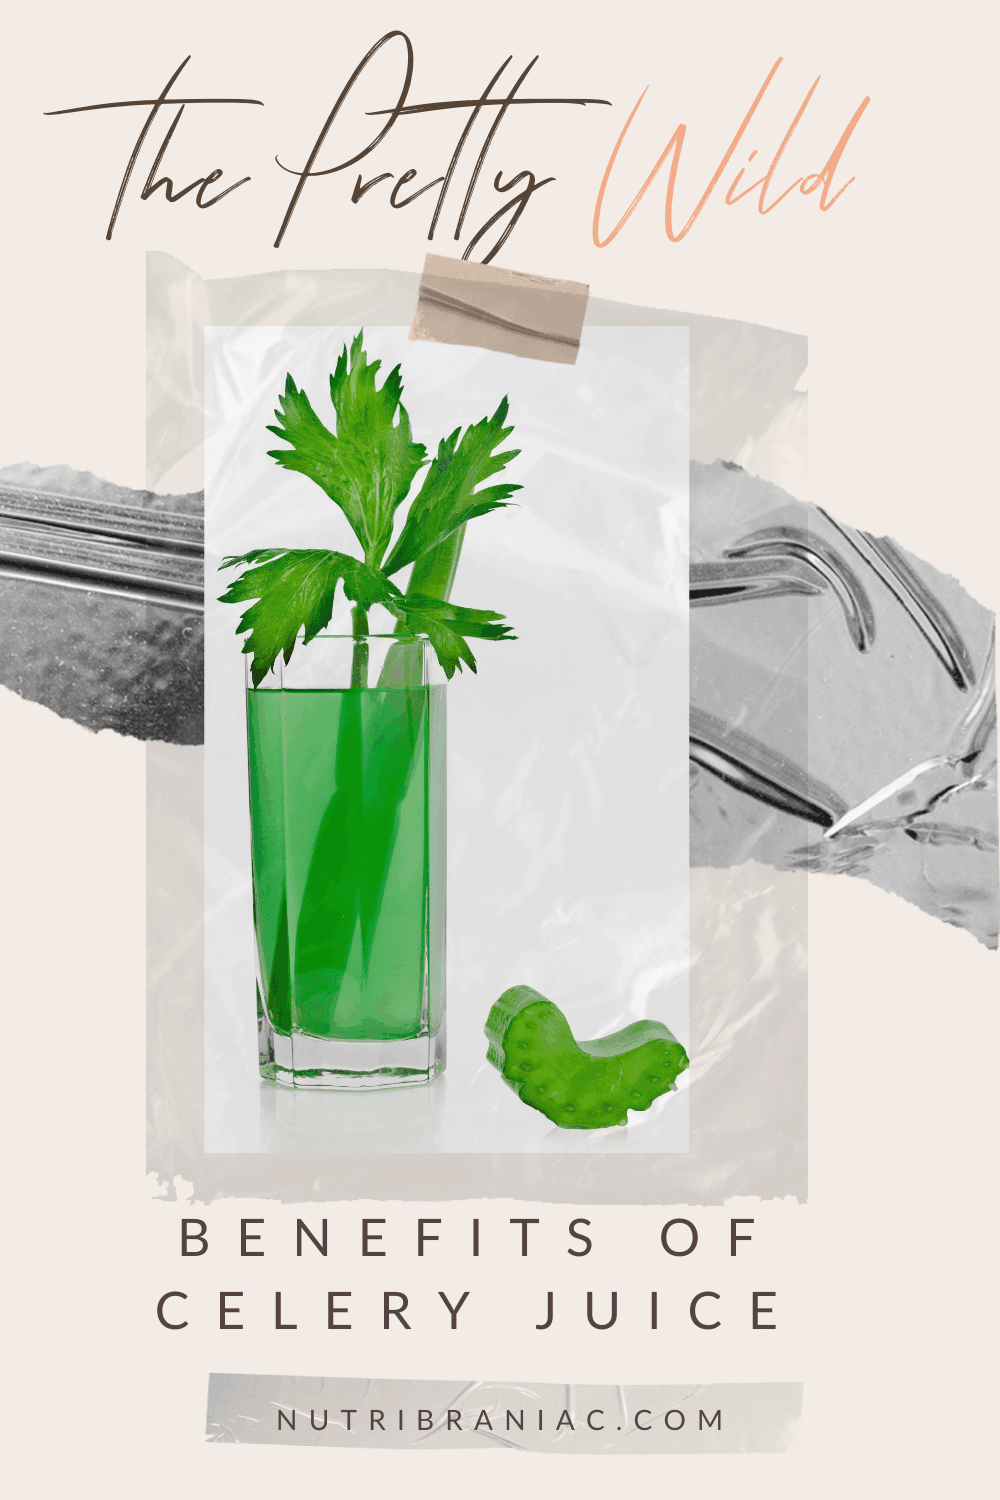 graphic image of celery juice with text overlay "The Pretty Wild Benefits of Celery Juice"